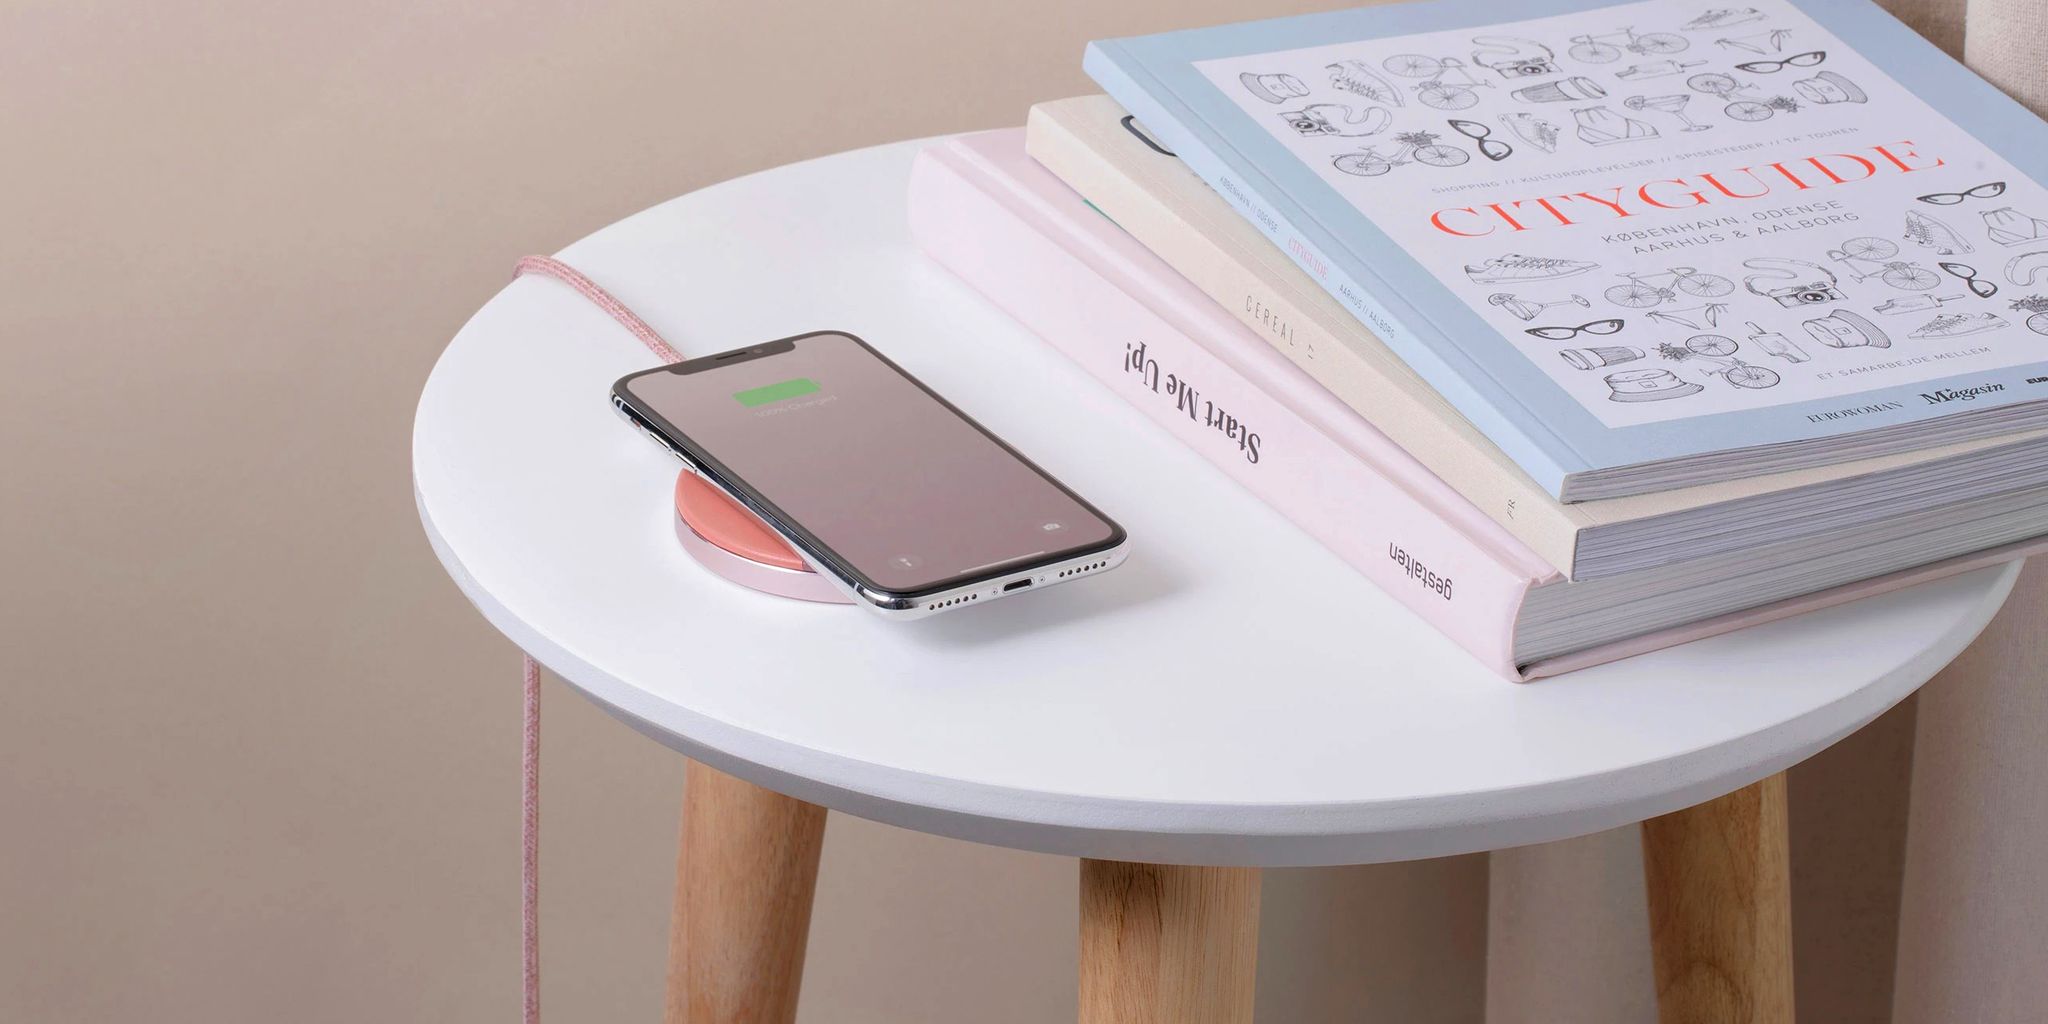 phone resting on native union wireless charger on side table with books